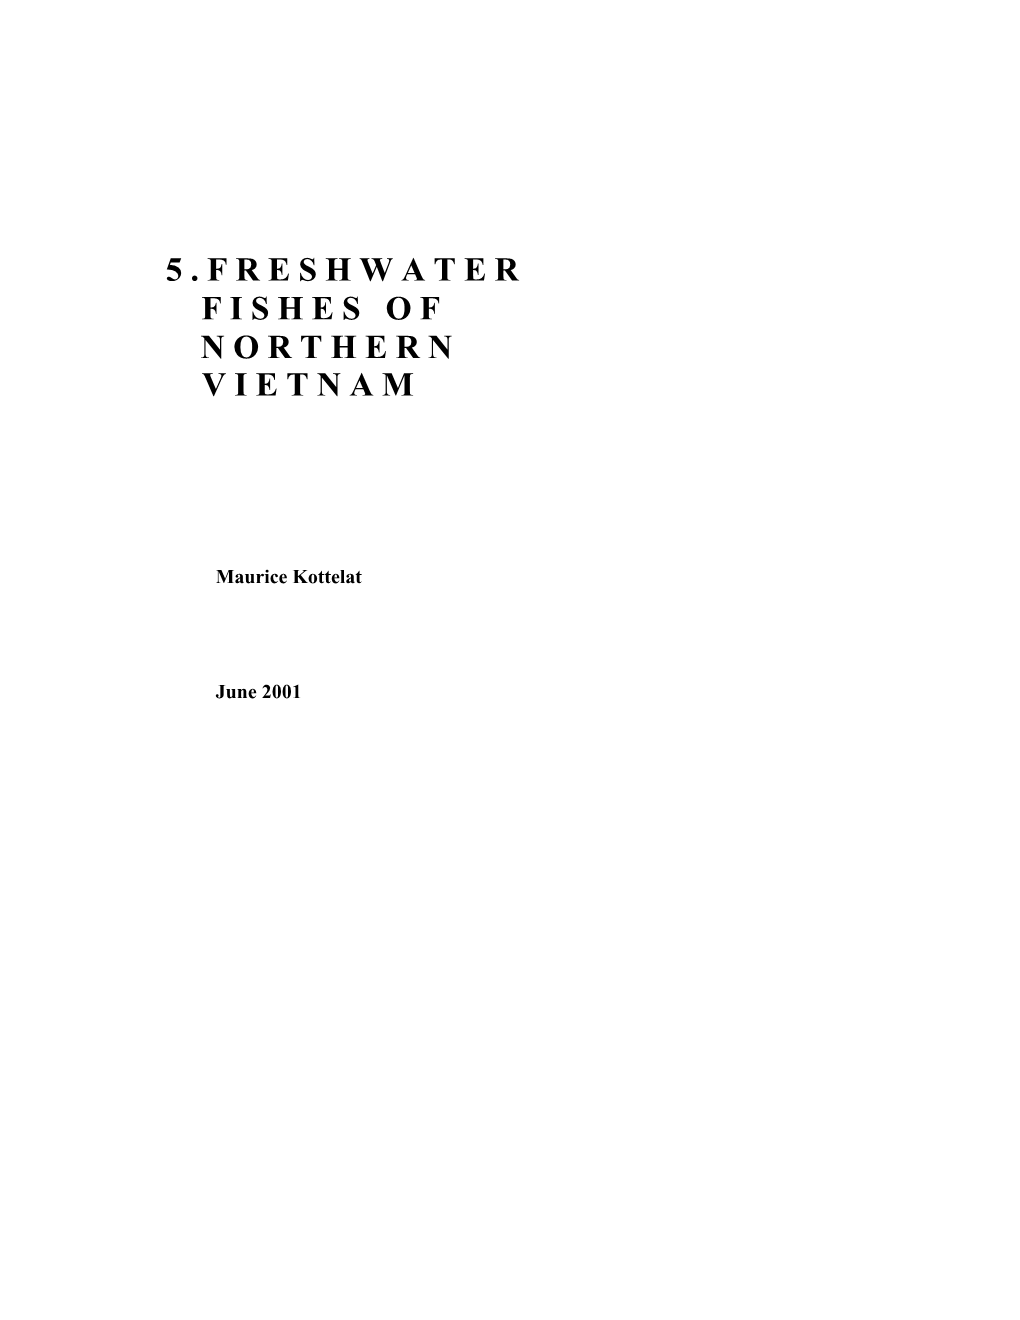 5.Freshwater Fishes of Northern Vietnam